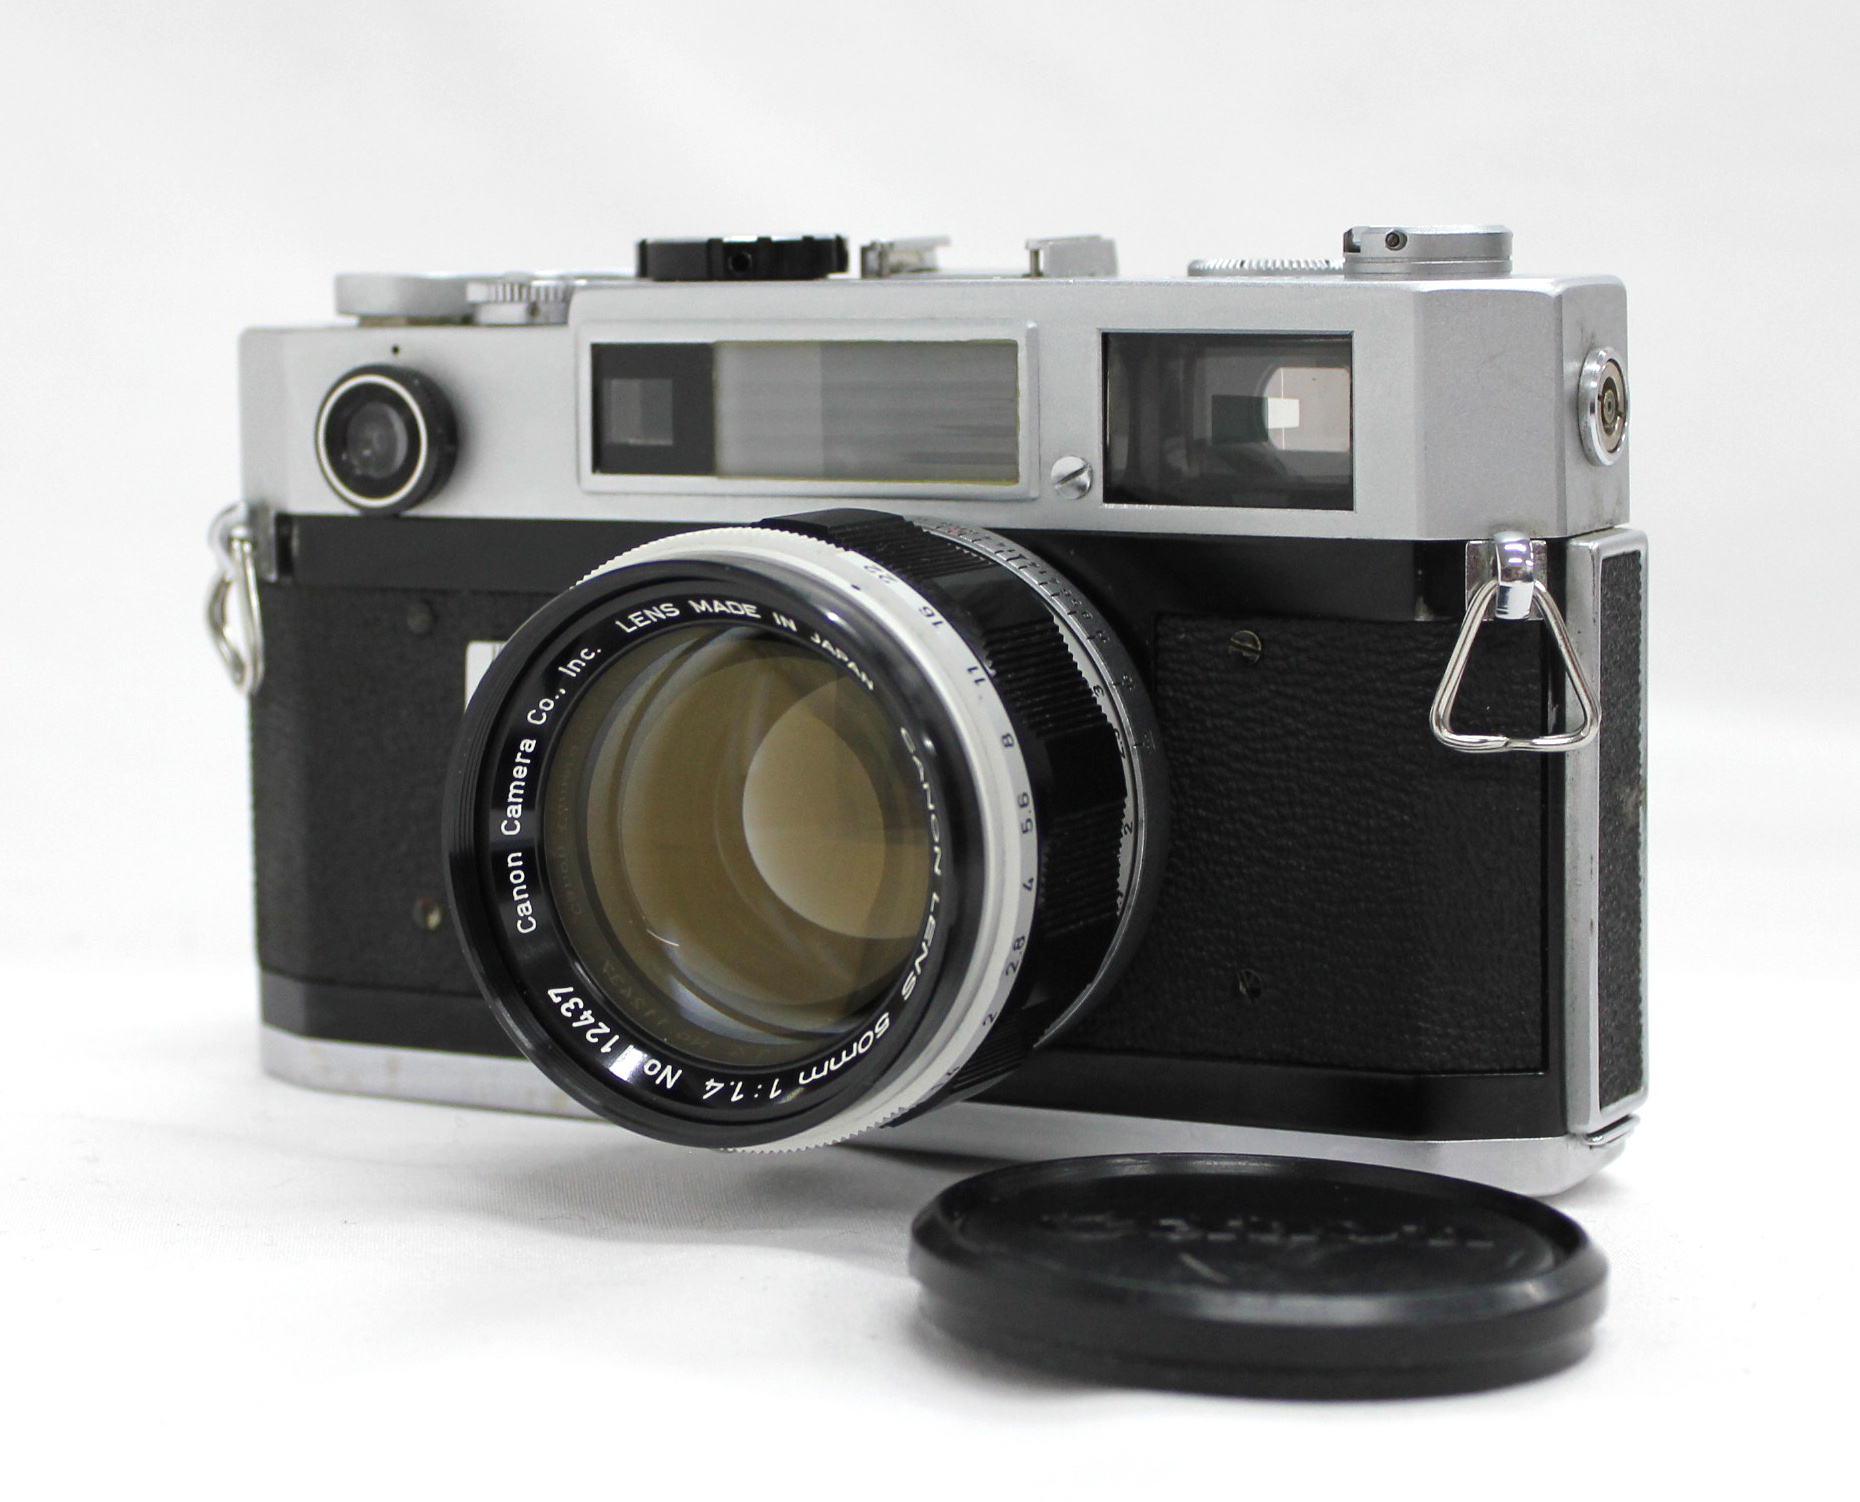 Japan Used Camera Shop | [Exc+++++] Canon Model 7s 35mm Rangefinder Camera w/ 50mm F/1.4 Lens from Japan 